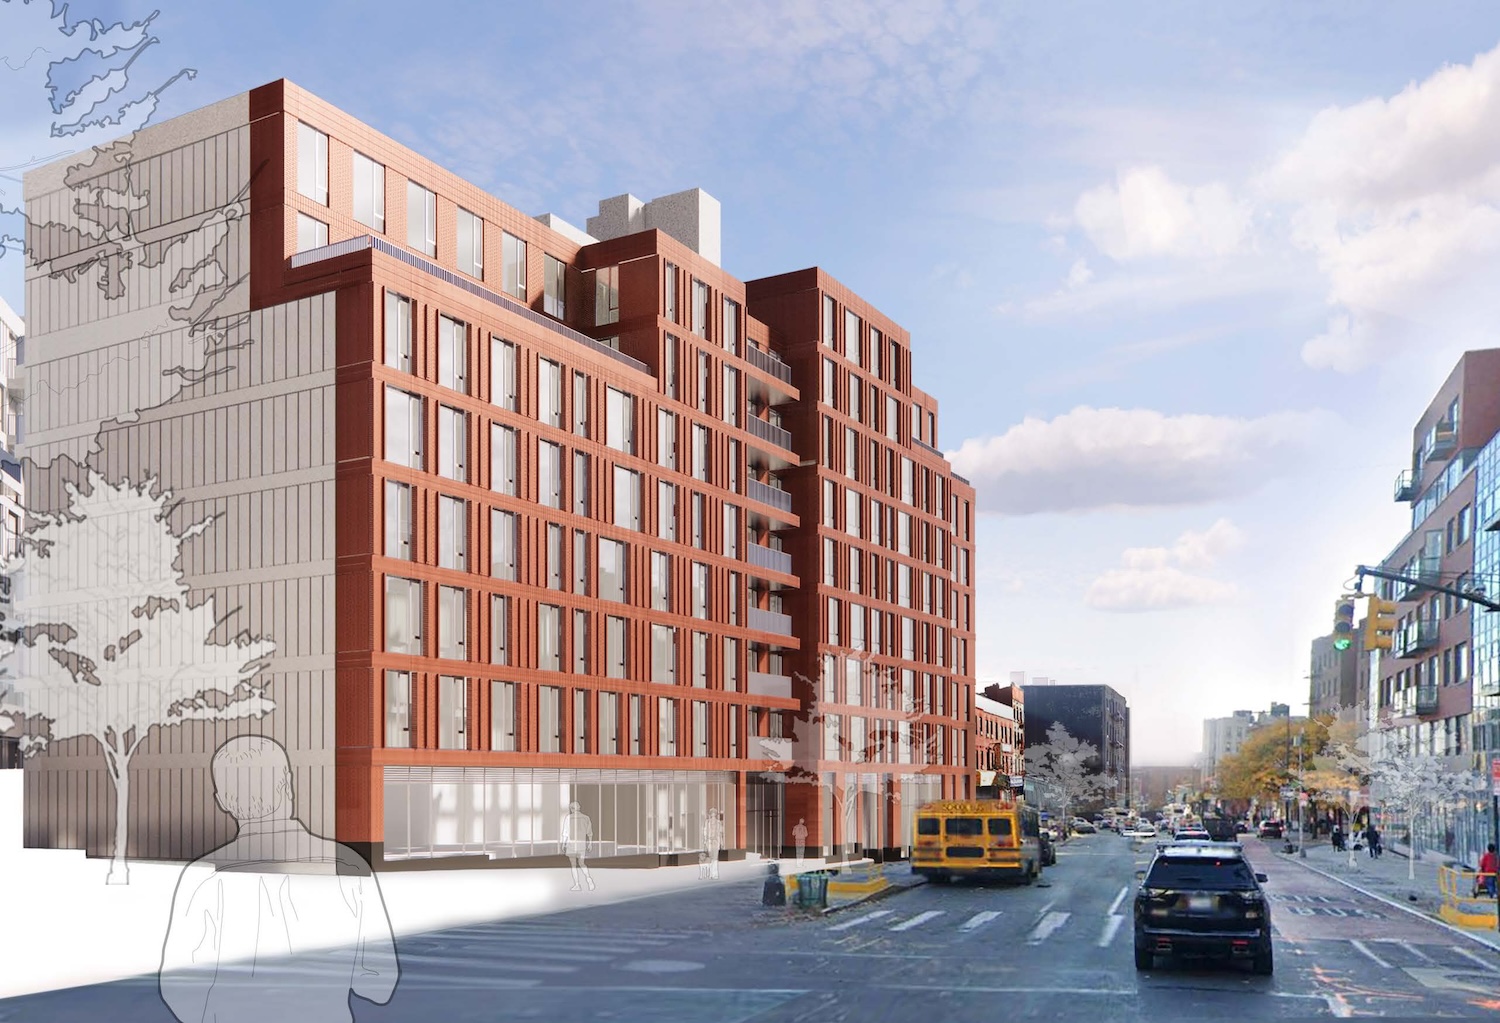 Rendering of 975 Nostrand Avenue, by ODA Architecture